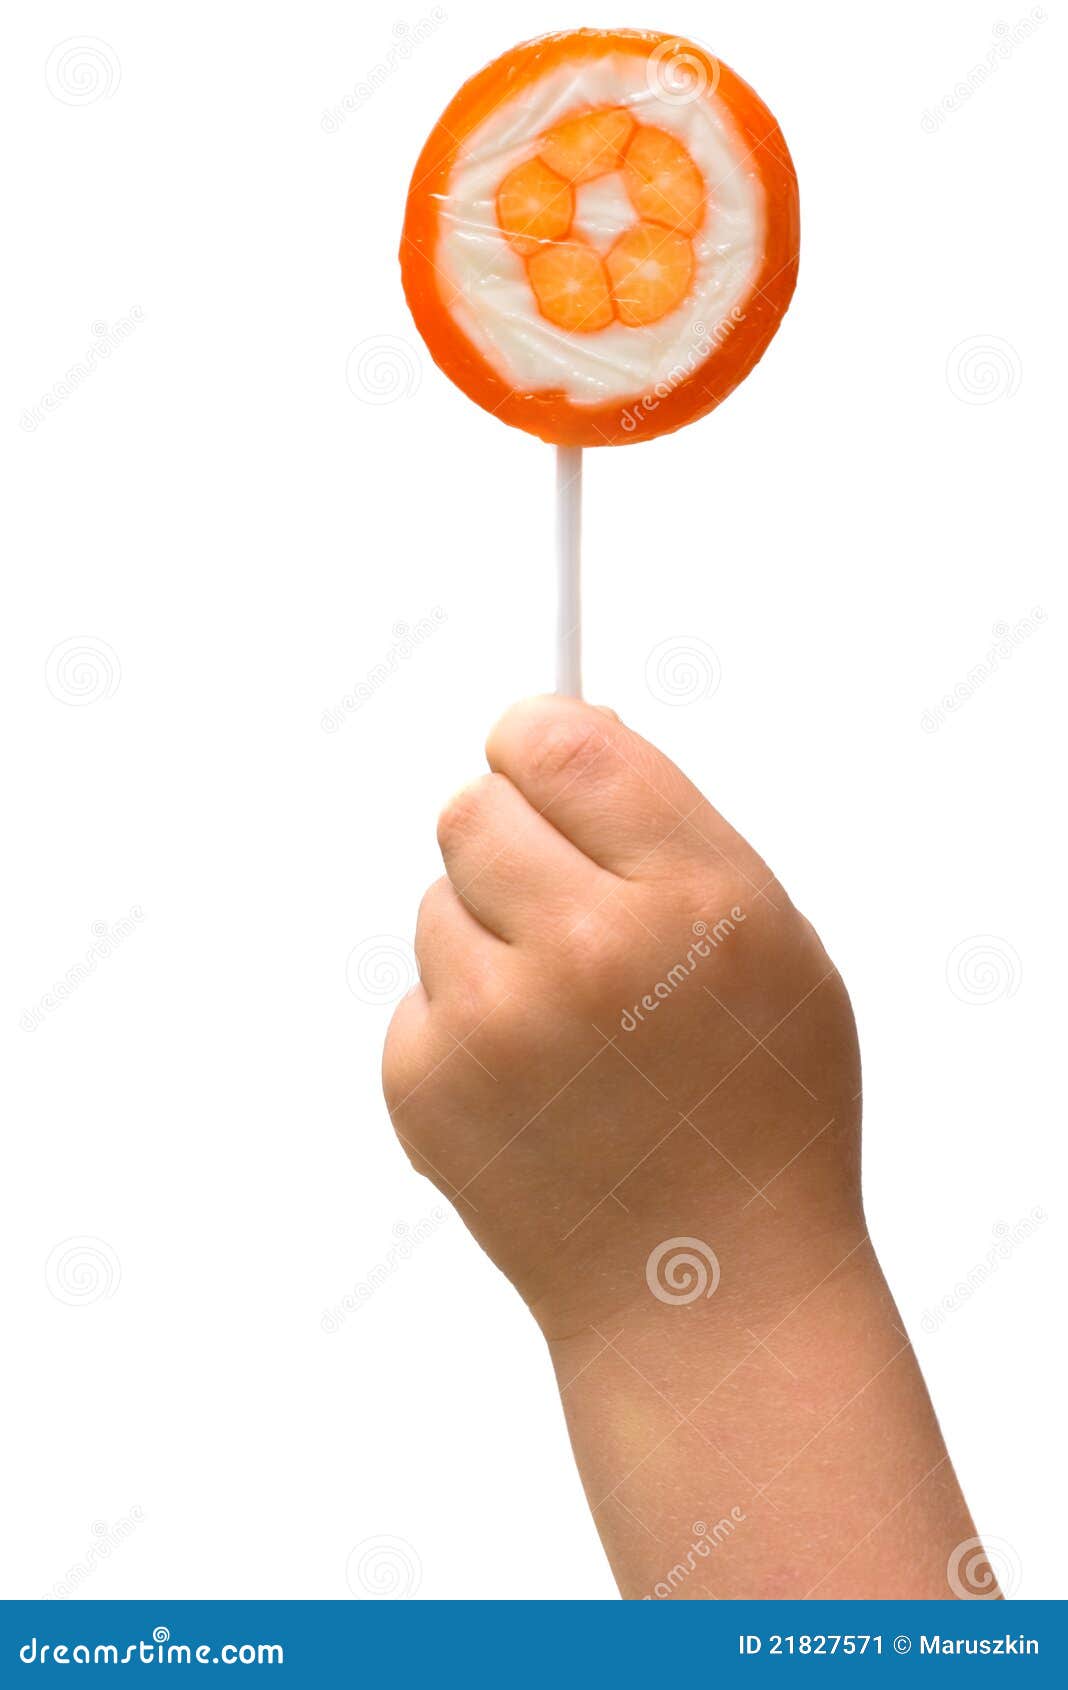 Lollipop in the Hand of a Child Stock Image - Image of background ...